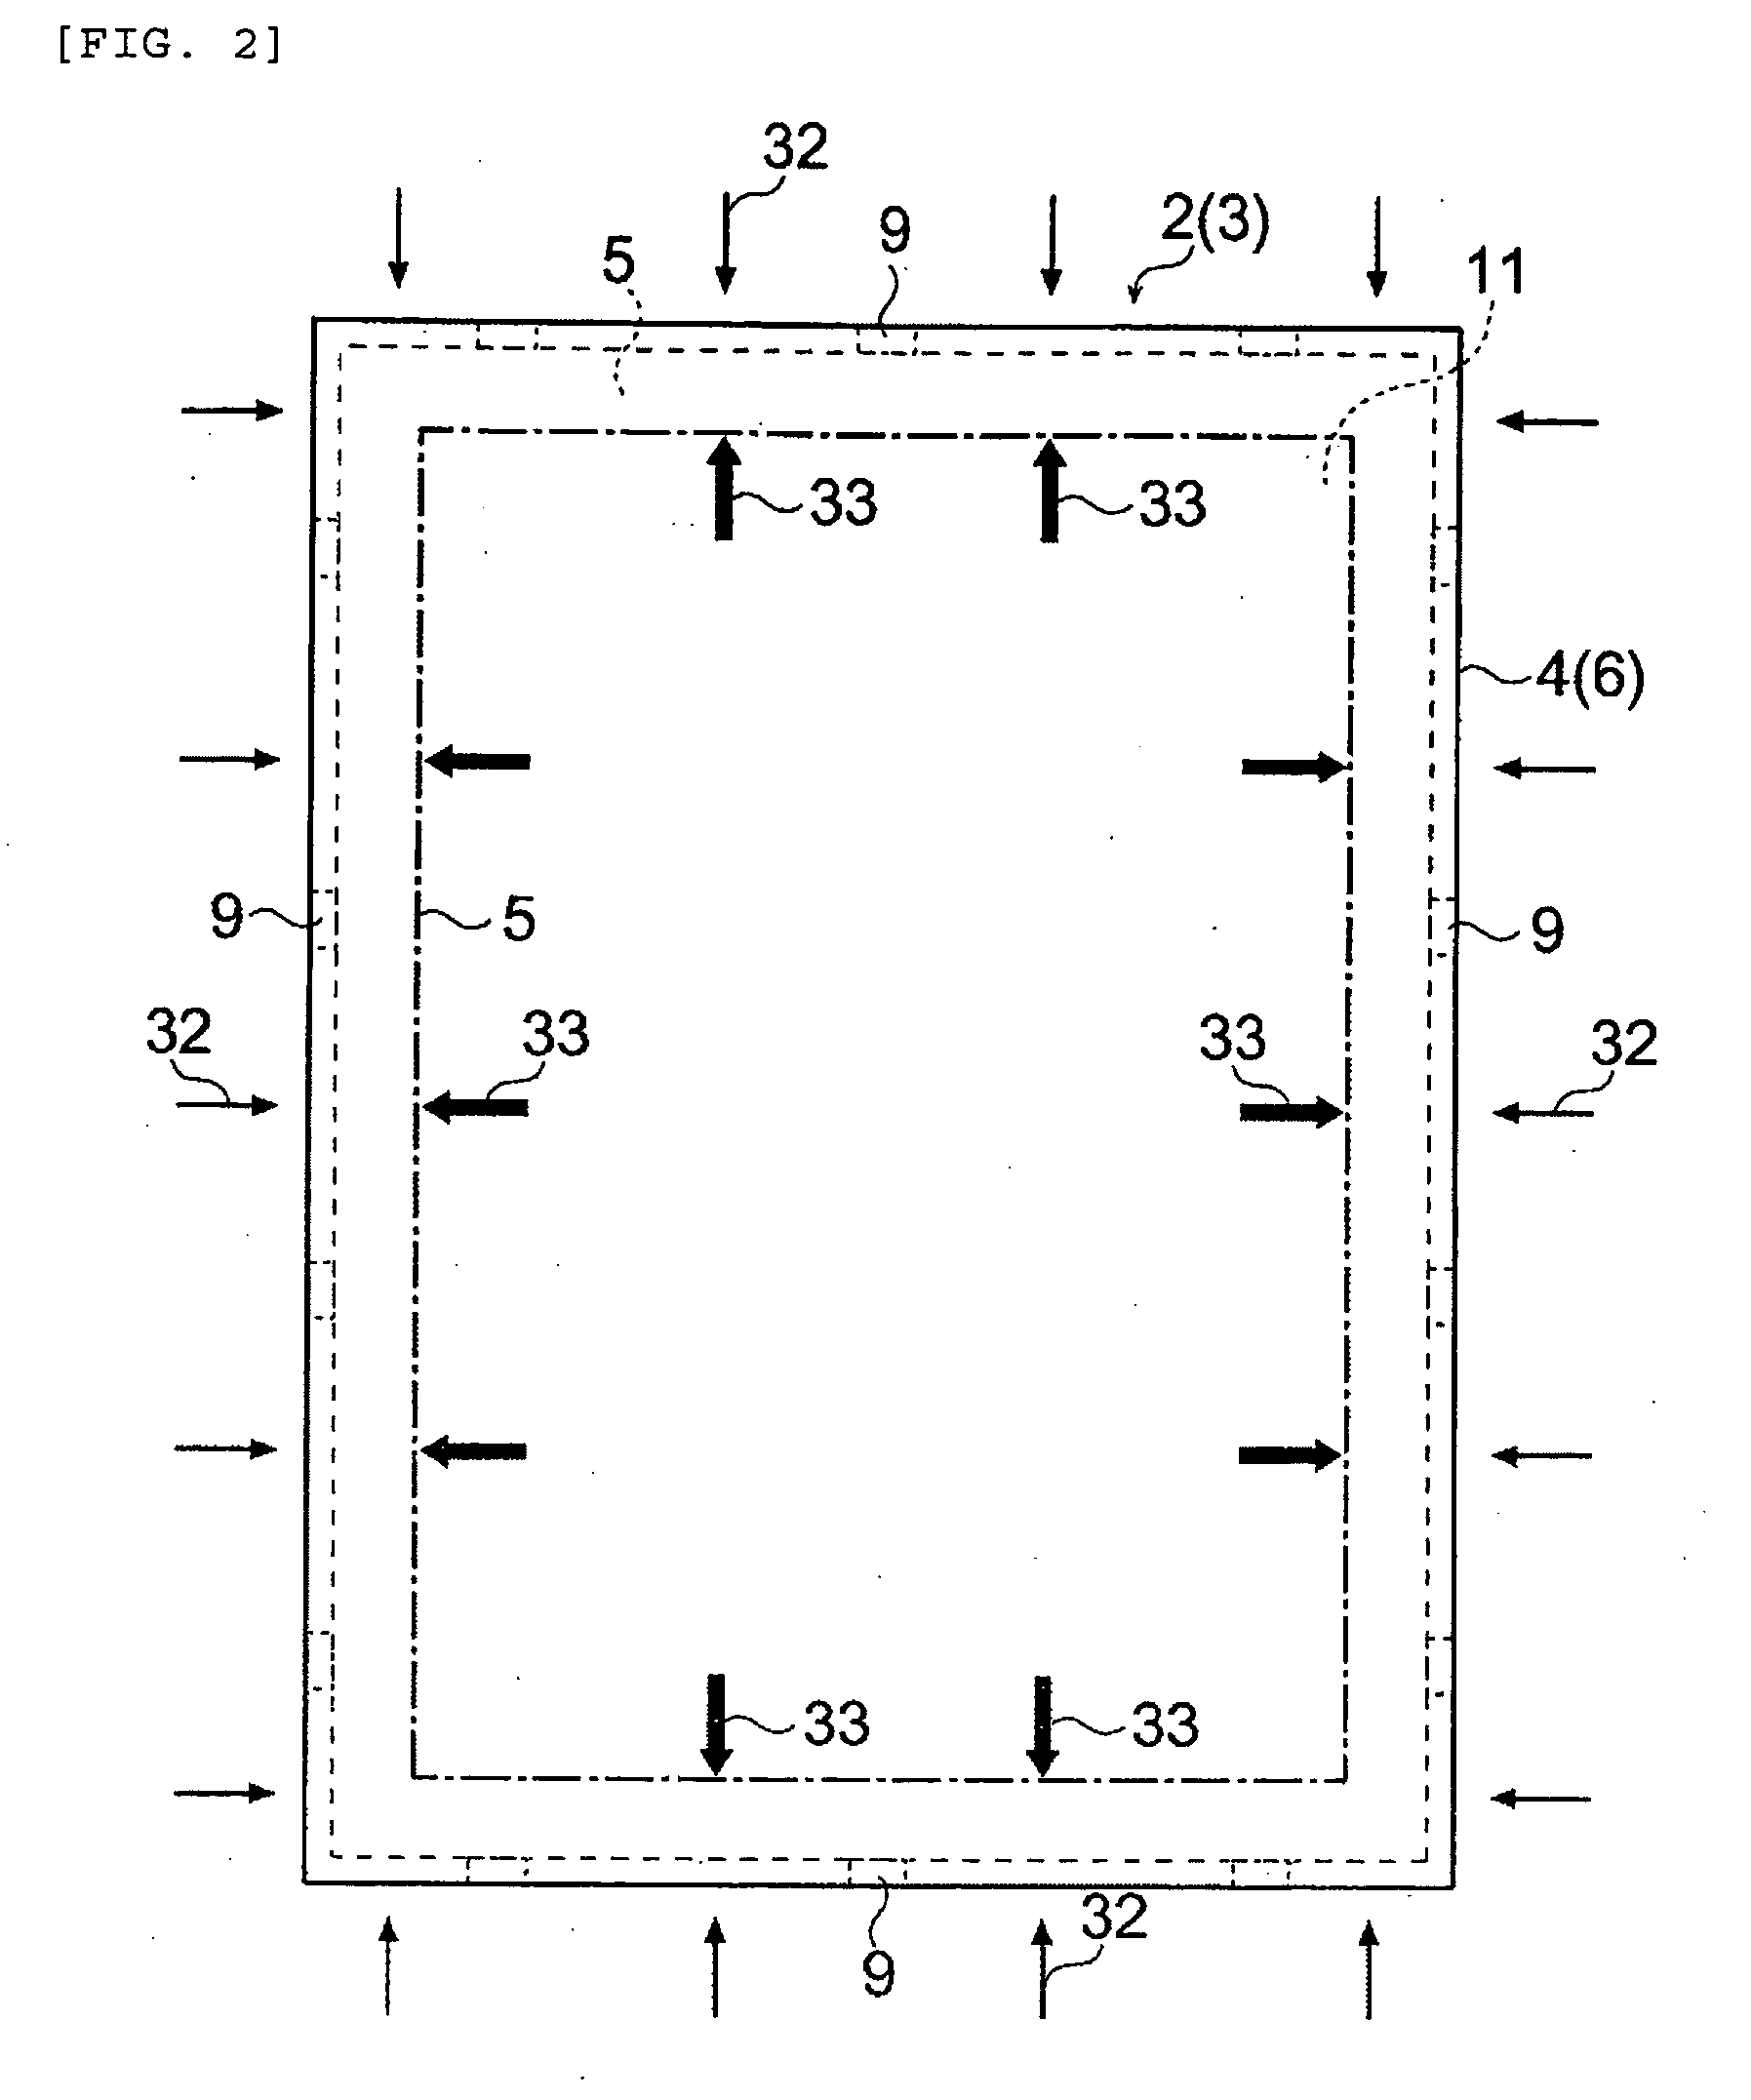 Method for manufacturing image display device